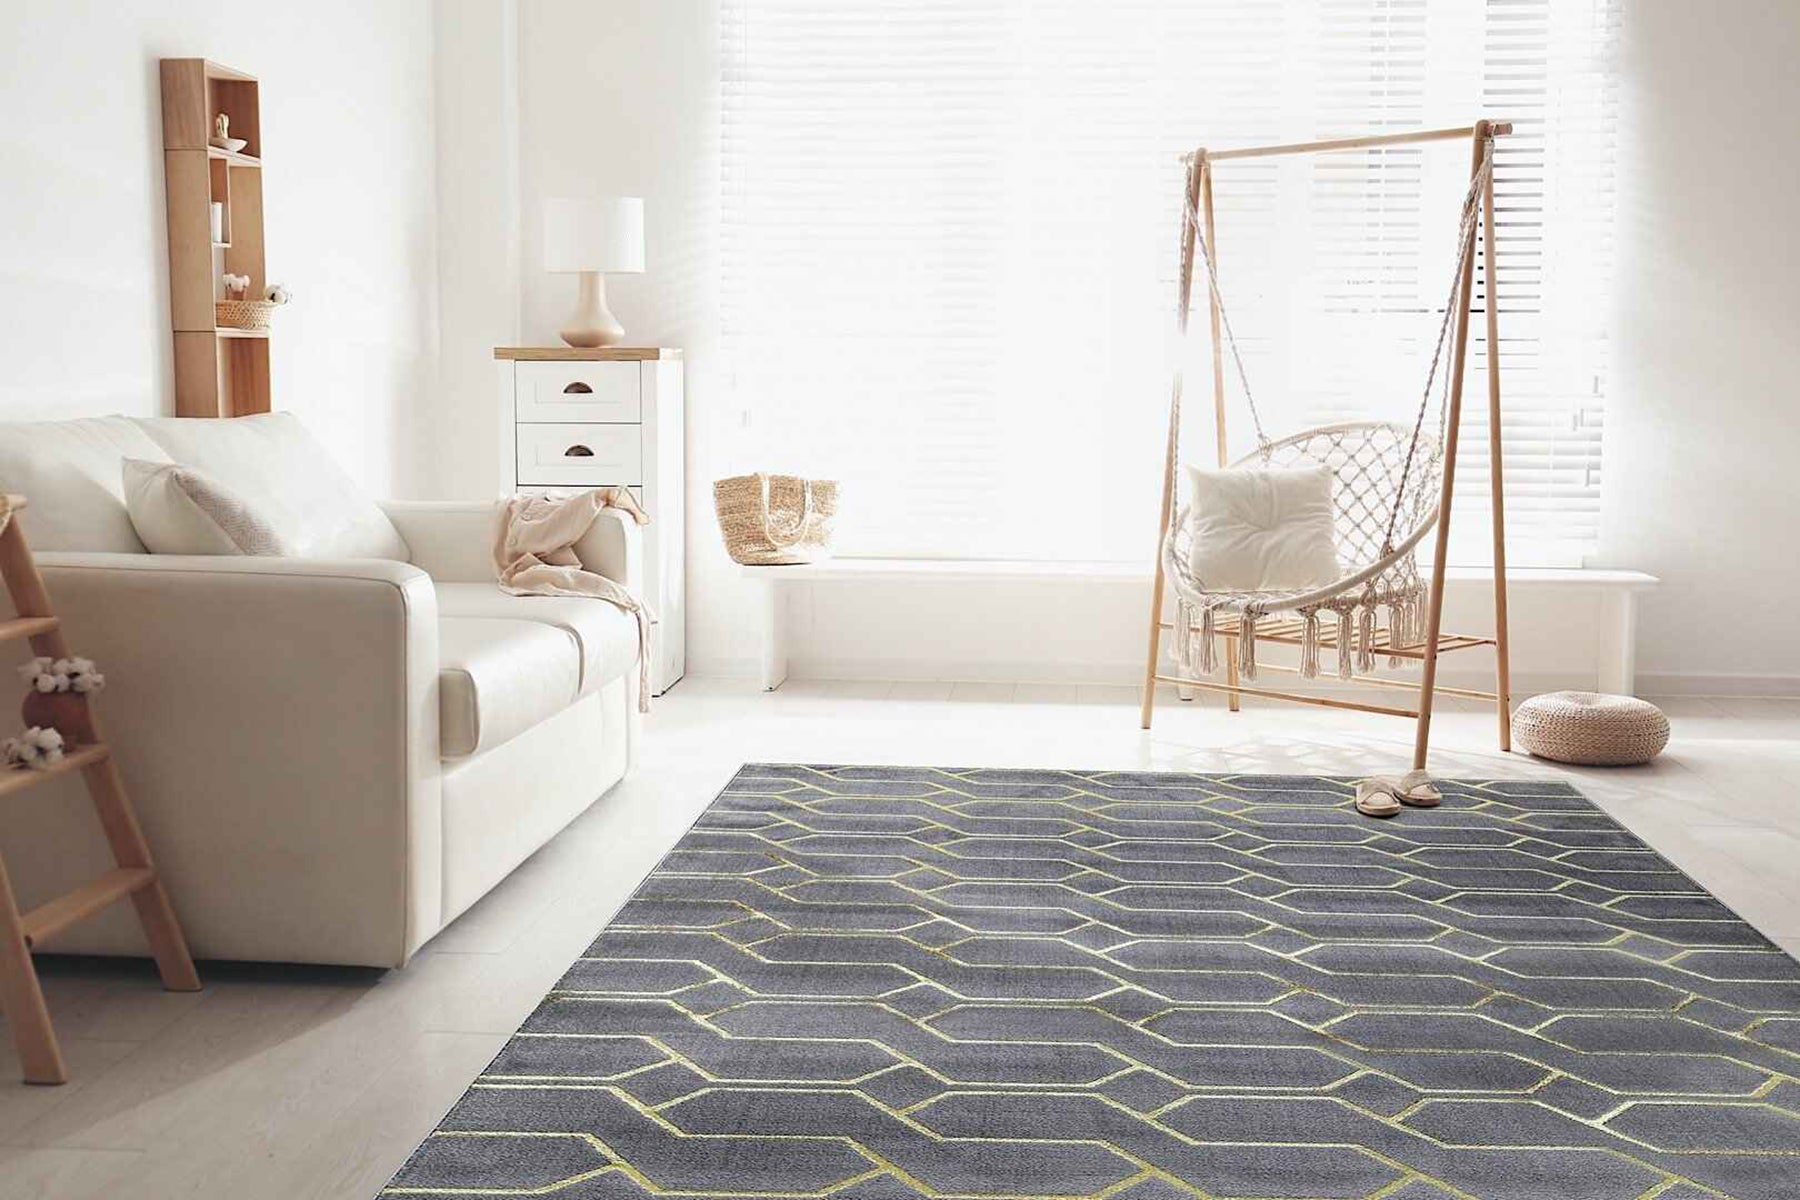 Caring for Your Wool Rug: Do's and Don'ts